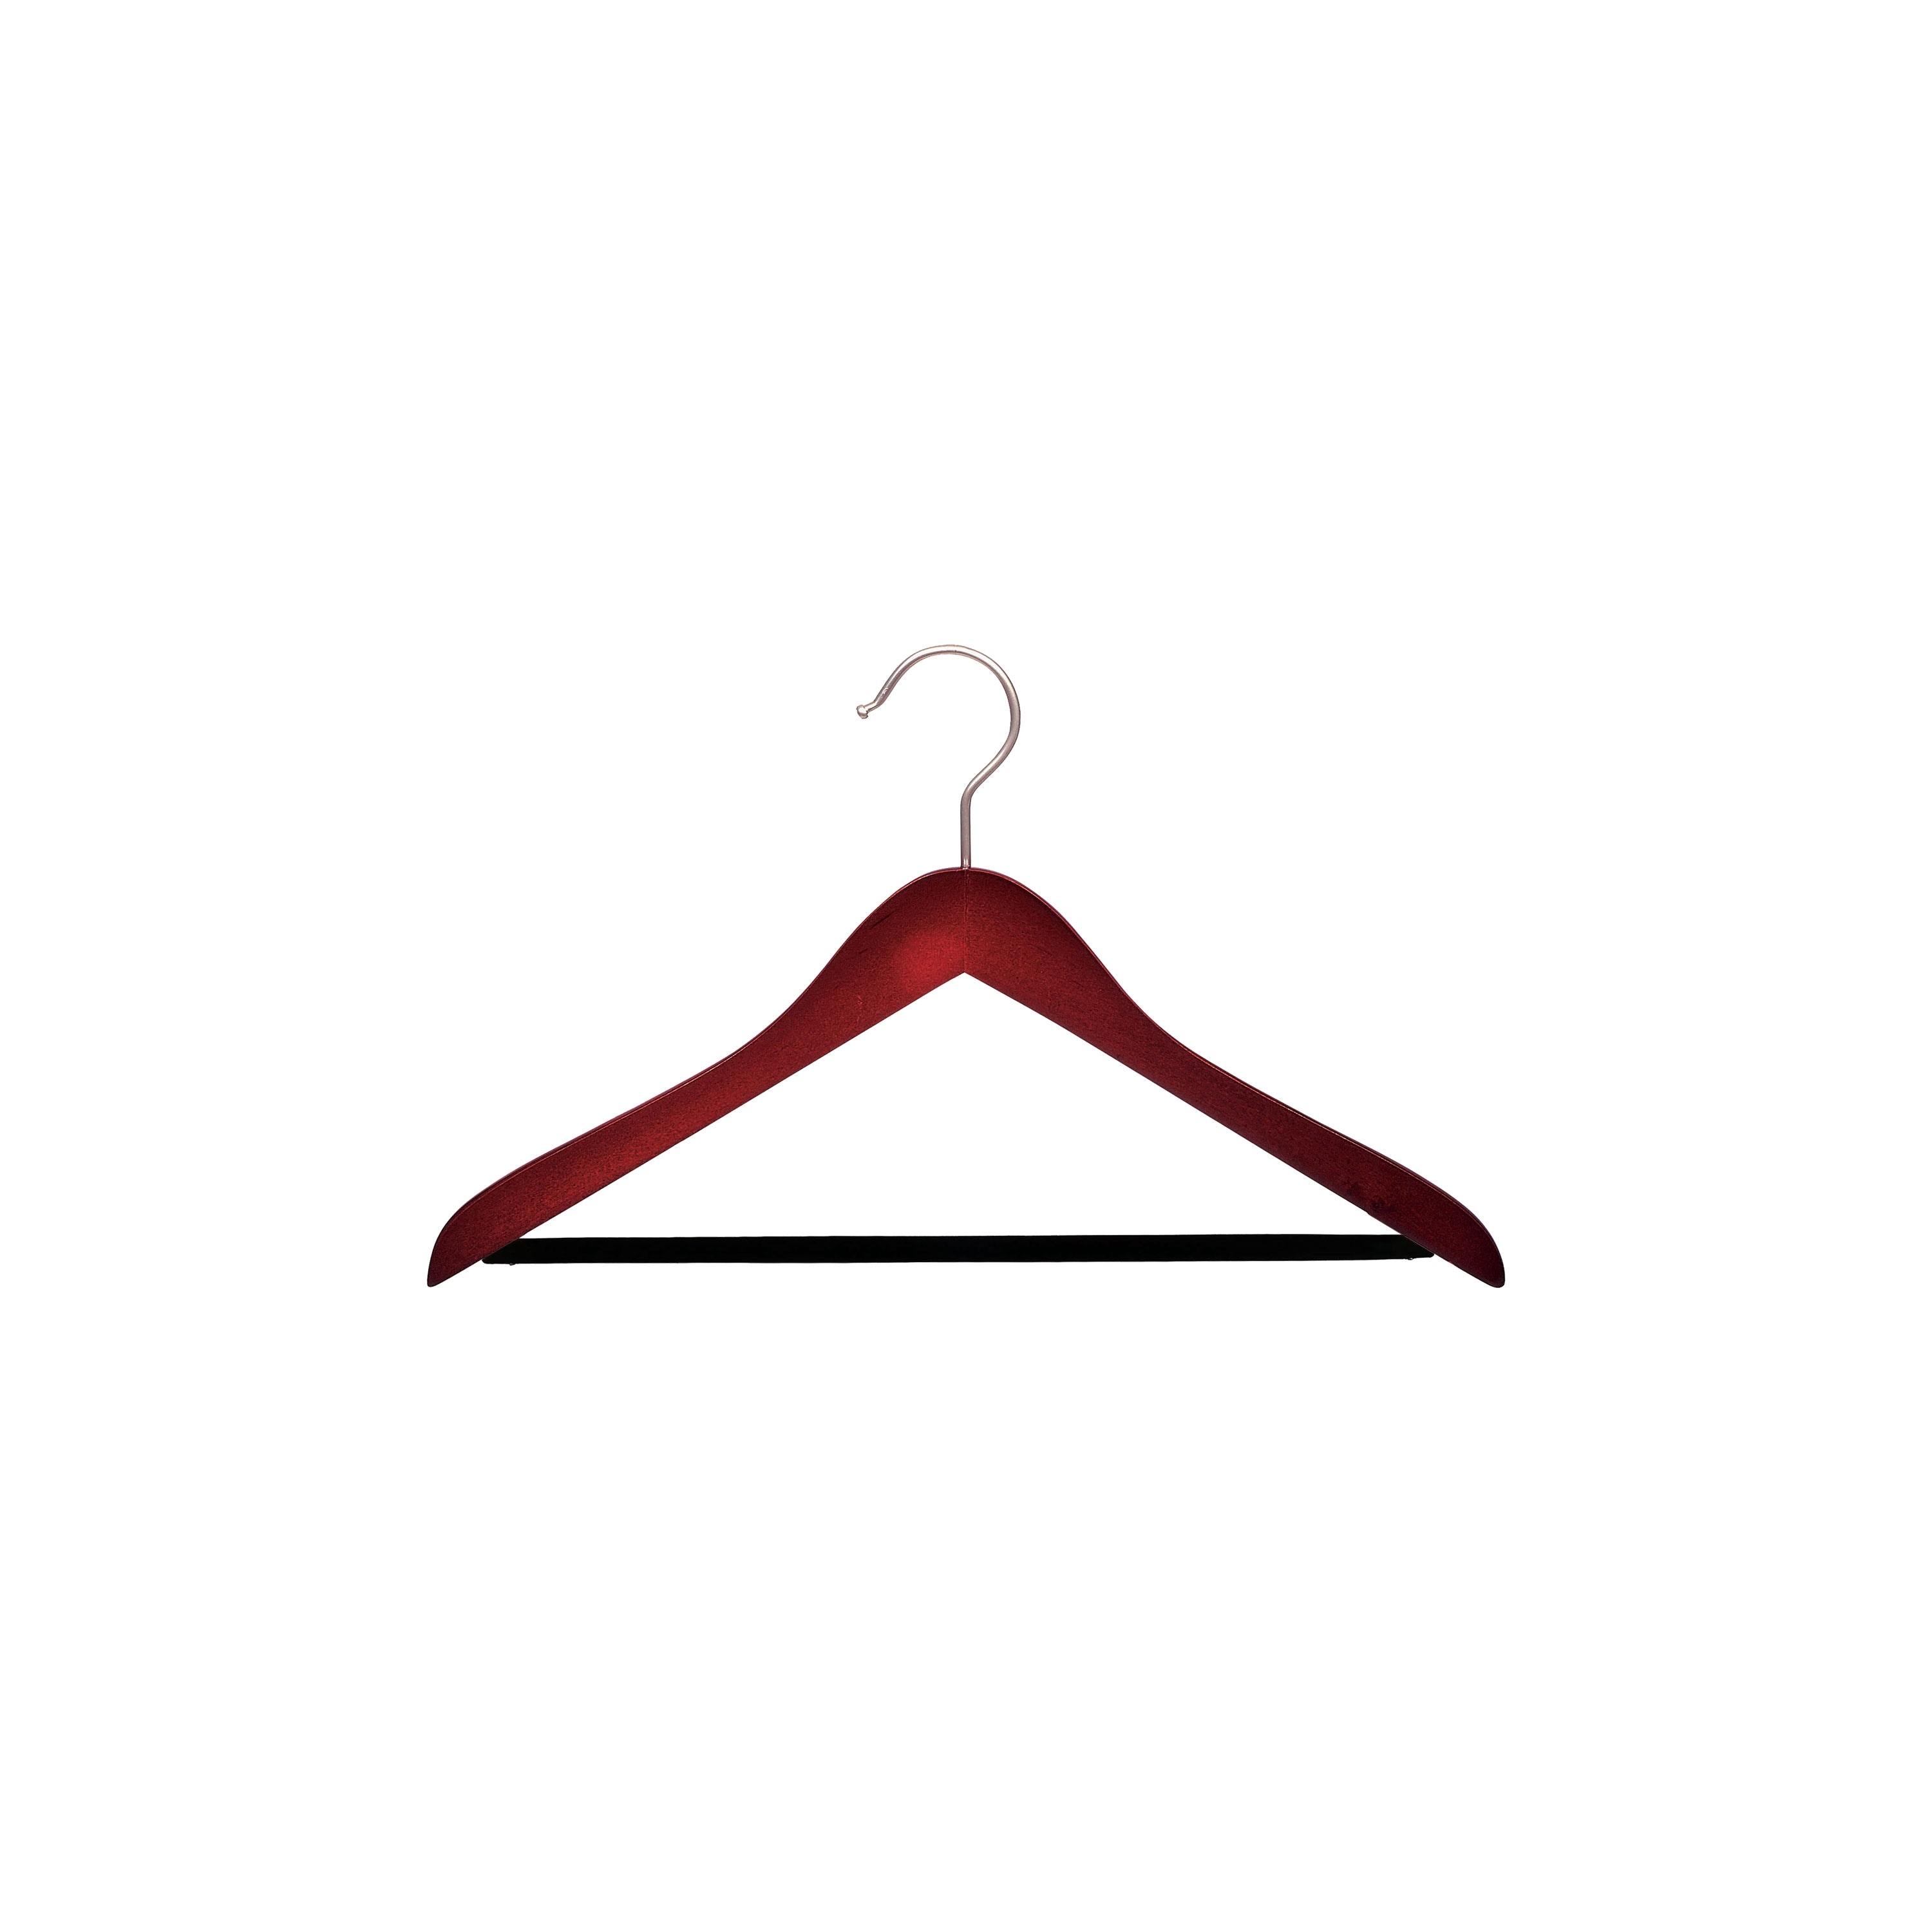 Triangle Clothes Hanger Solid Metal Coat Hangers Anti-Slip Drying